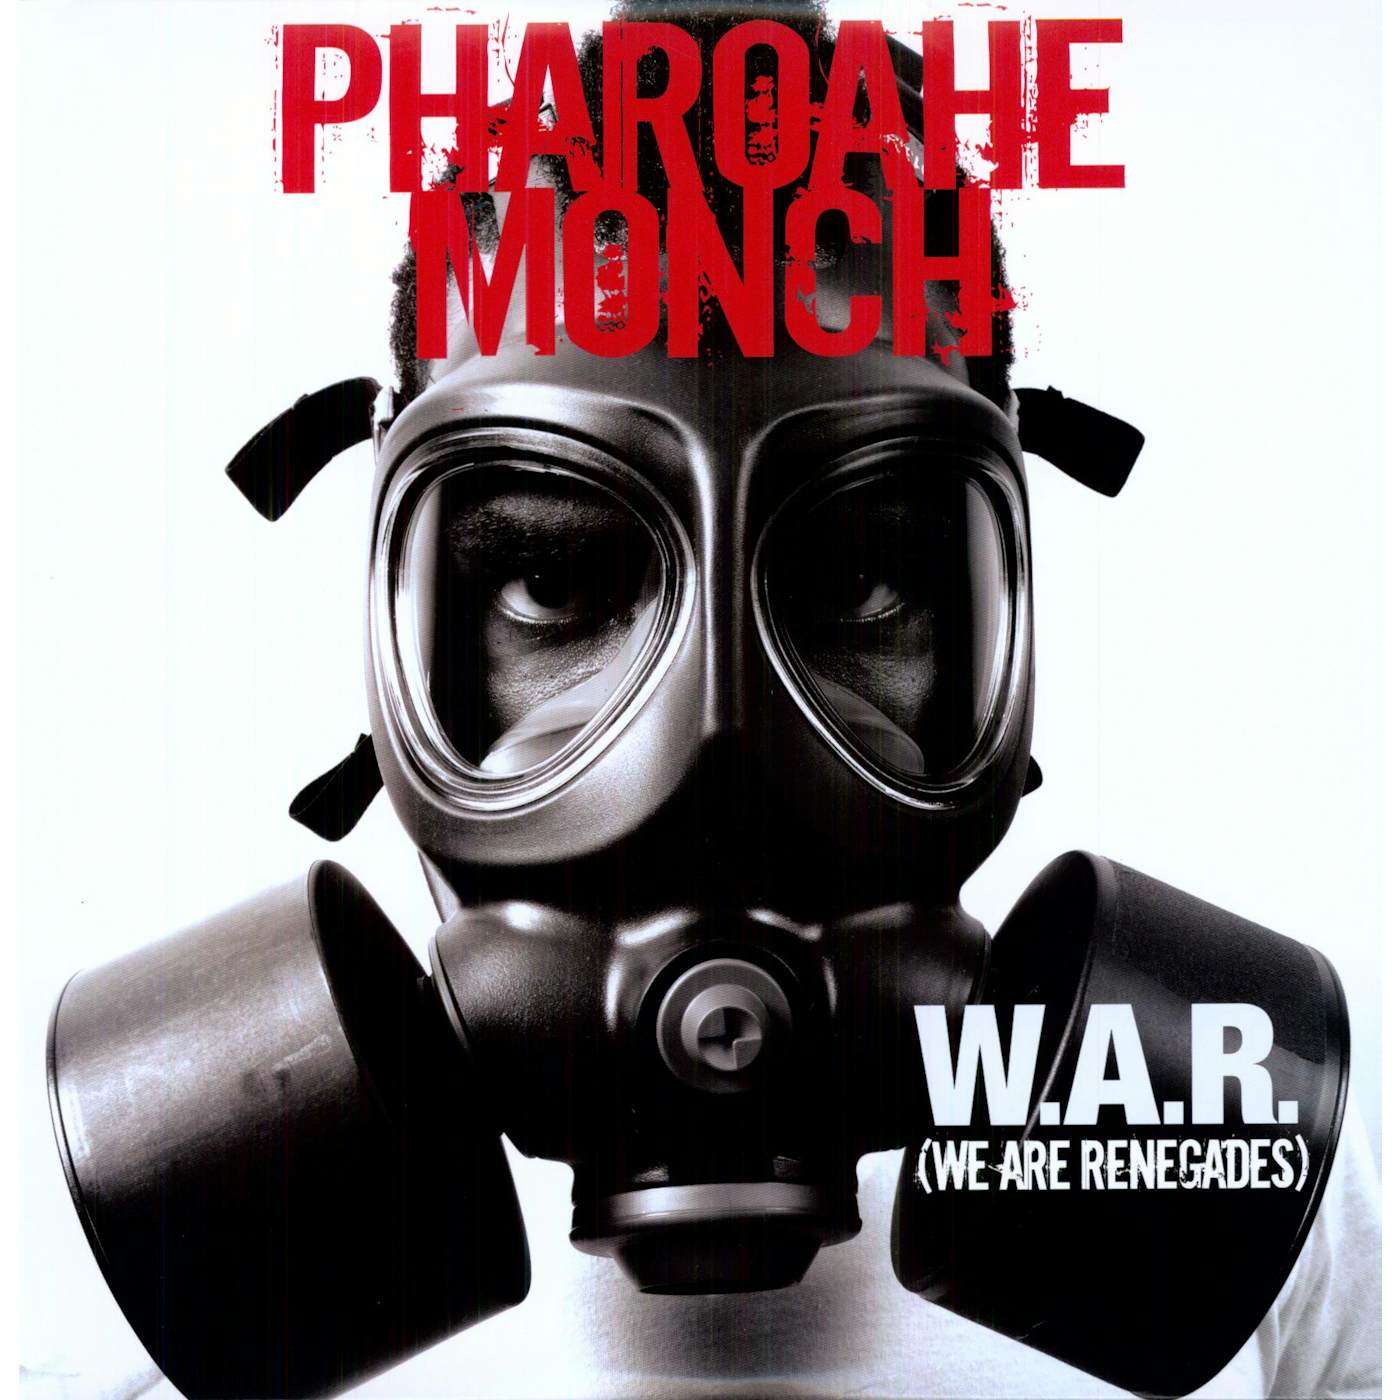 Pharoahe Monch W.A.R. (We Are Renegades) Vinyl Record